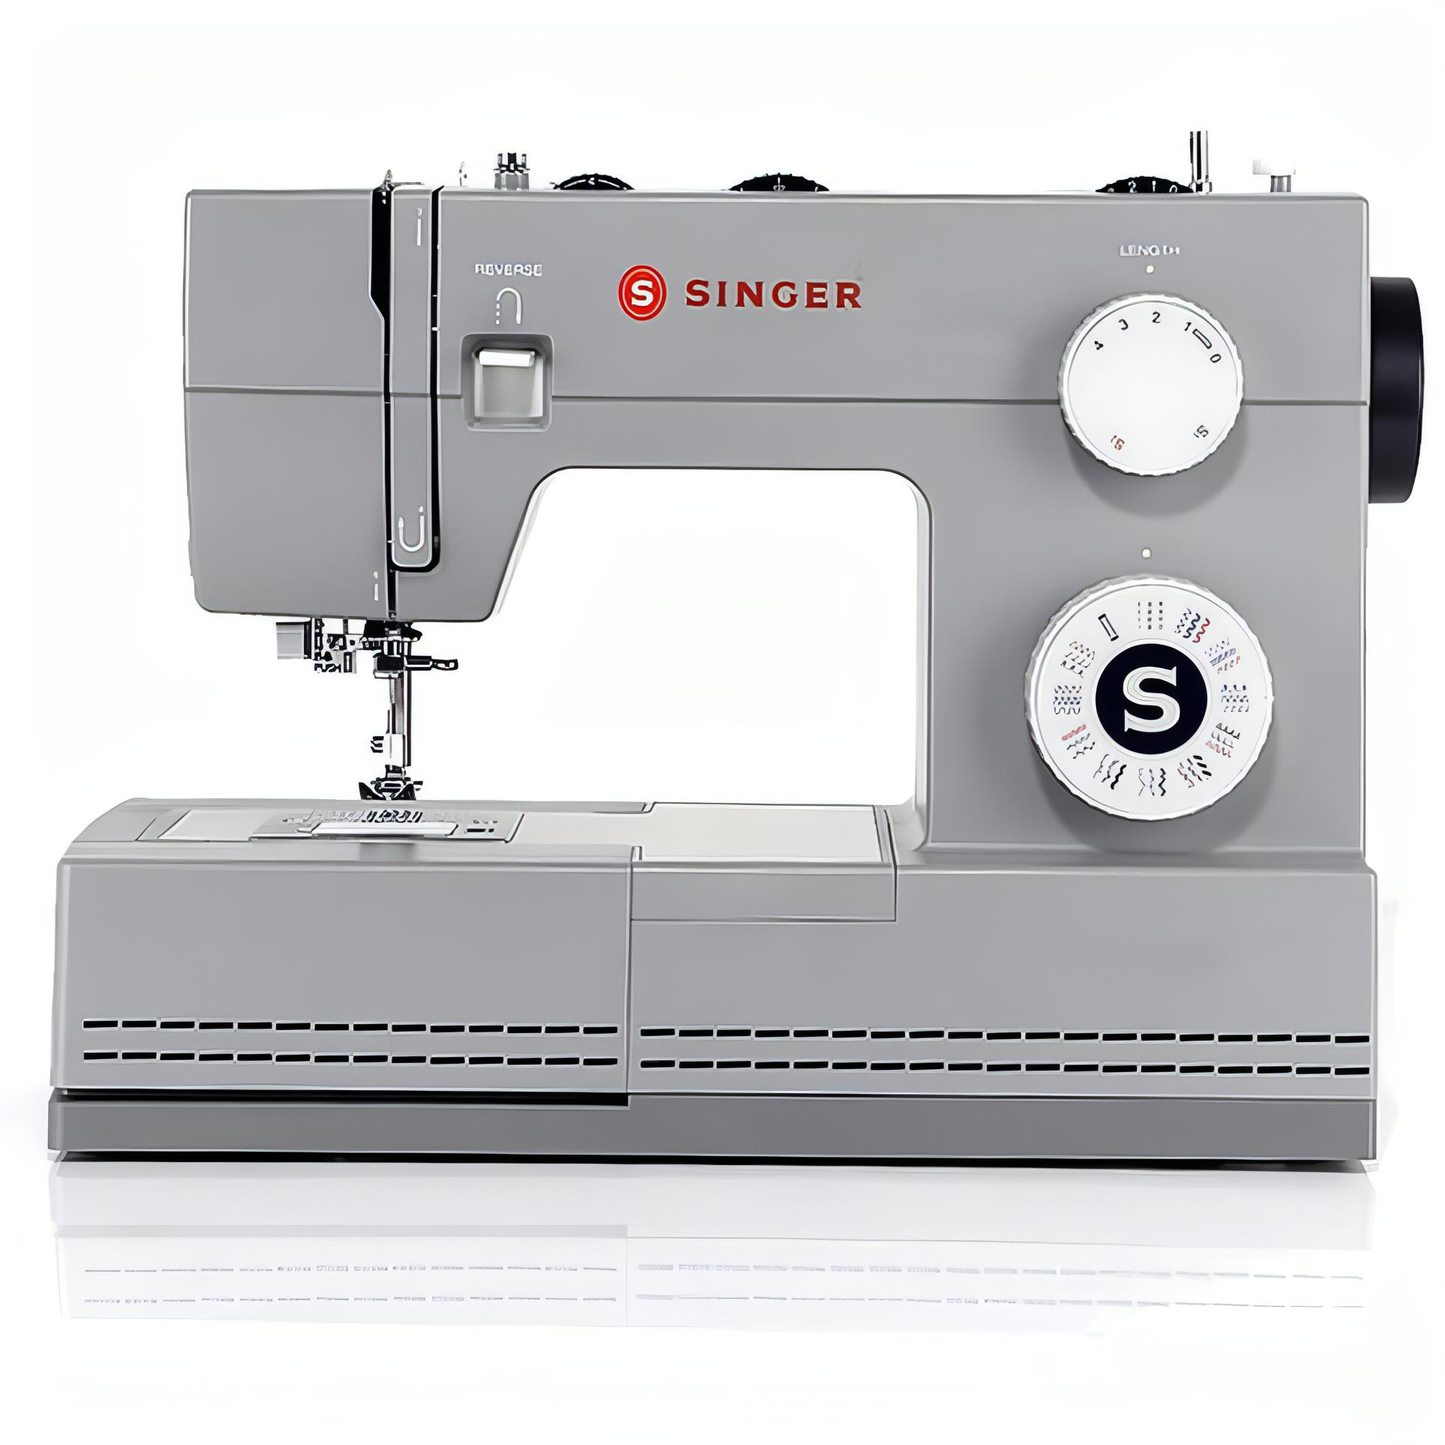 Singer Heavy Duty 4423 Sewing Machine * FREE Upgrade Offer from 23 to 100 stitch patterns - exclusive to Singer Outlet * - latest 2024 model with dual pulley system for maximum penetration power